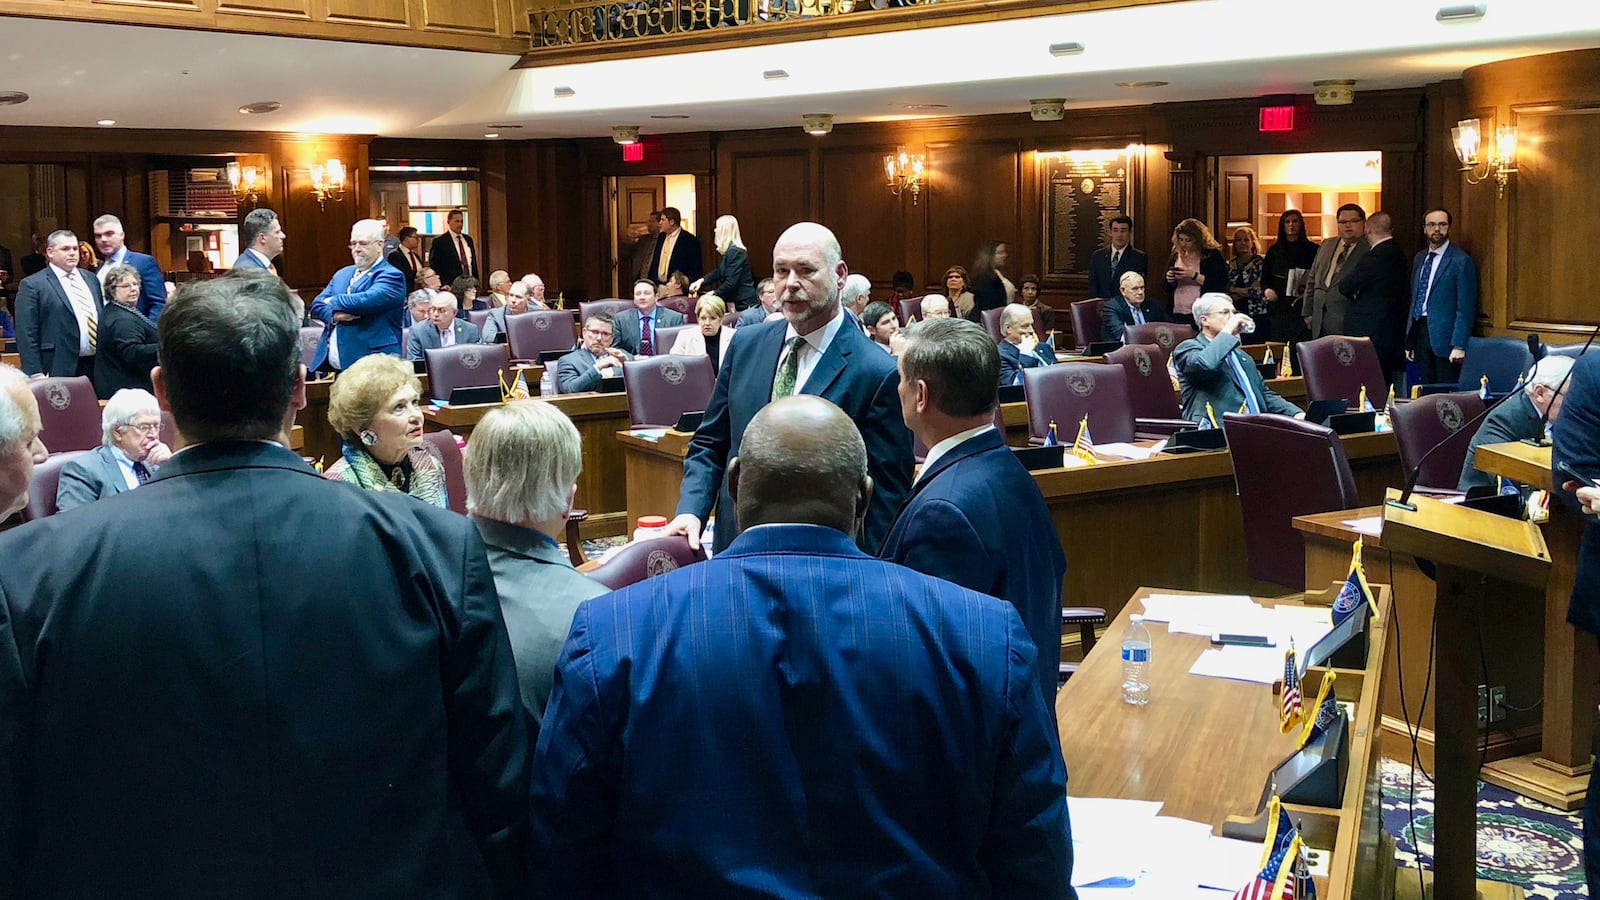 House Speaker Brian Bosma talks with Democrats shortly before the session adjourned without passing several bills.